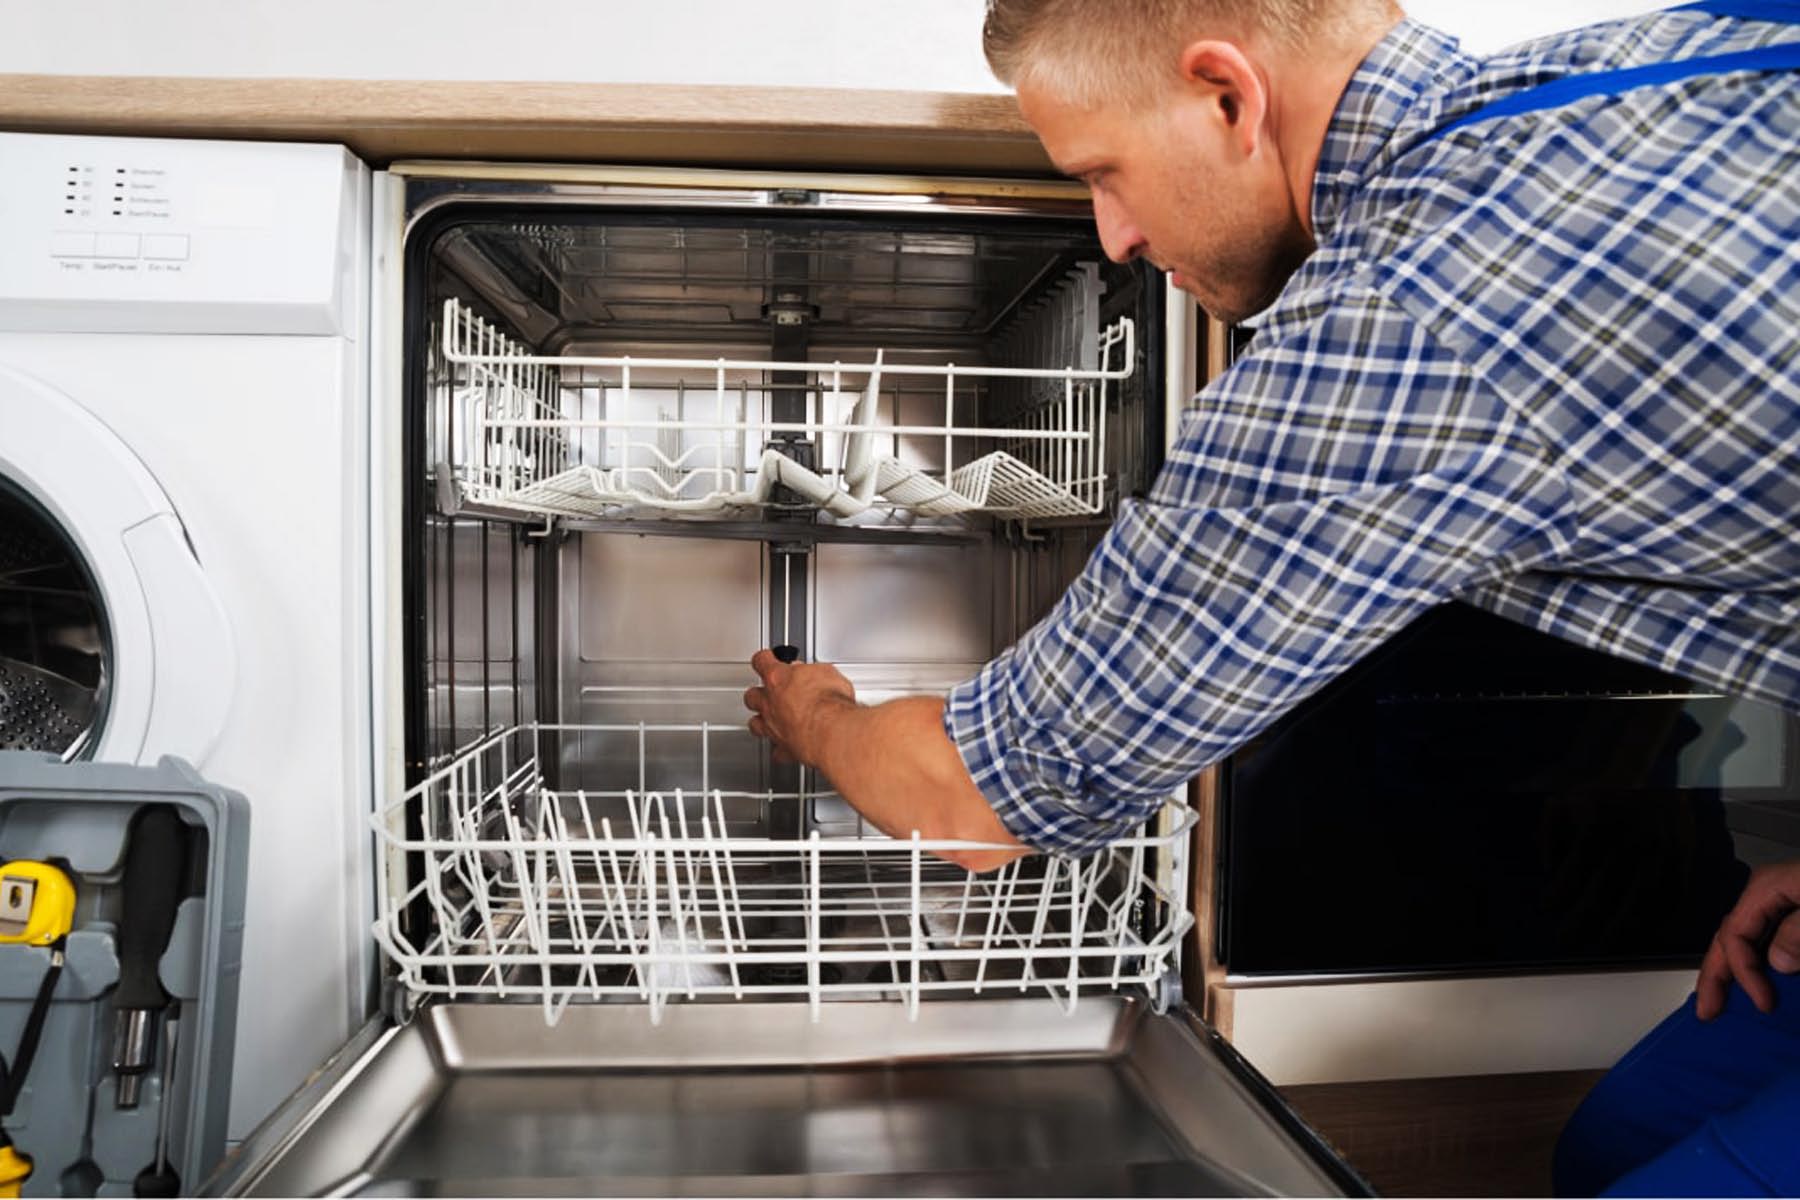 Lakeway's Leading Miele Dishwasher Repair - Expert Luxury Appliance Service in TX